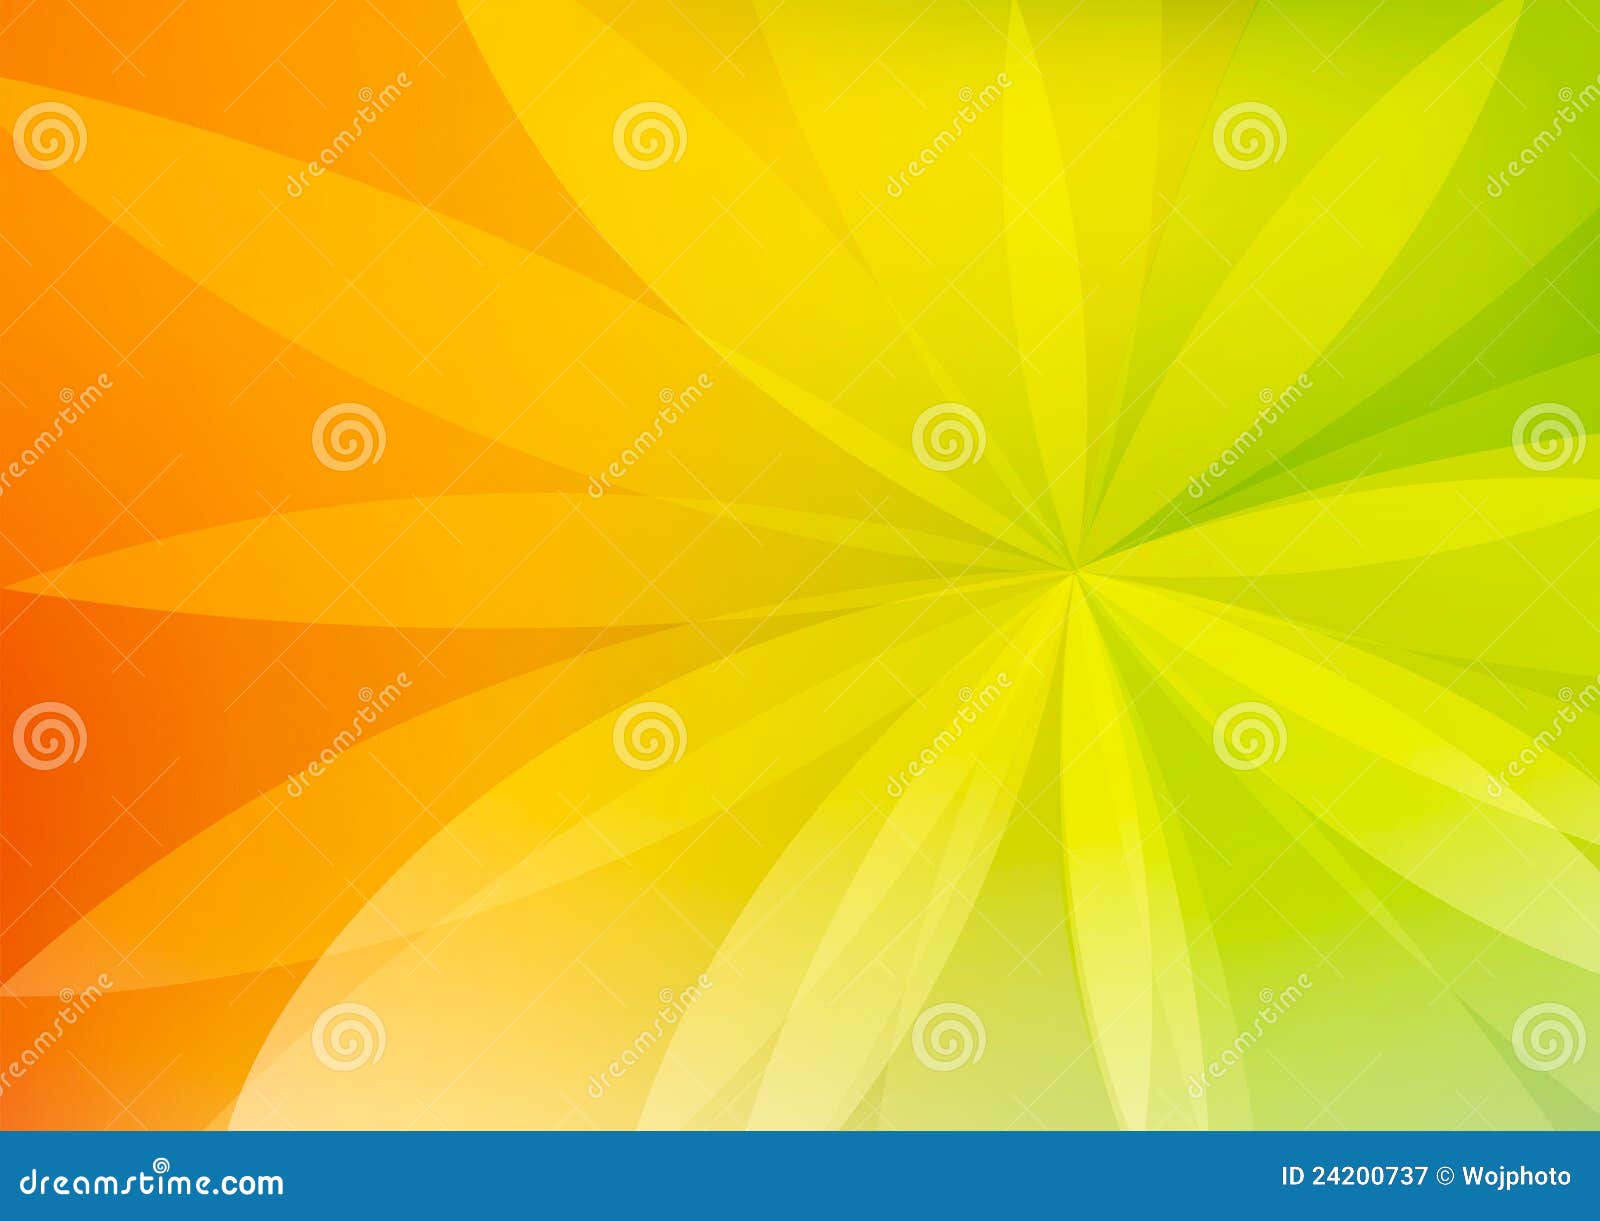 Abstract Green And Orange Background Wallpaper Royalty Free Stock